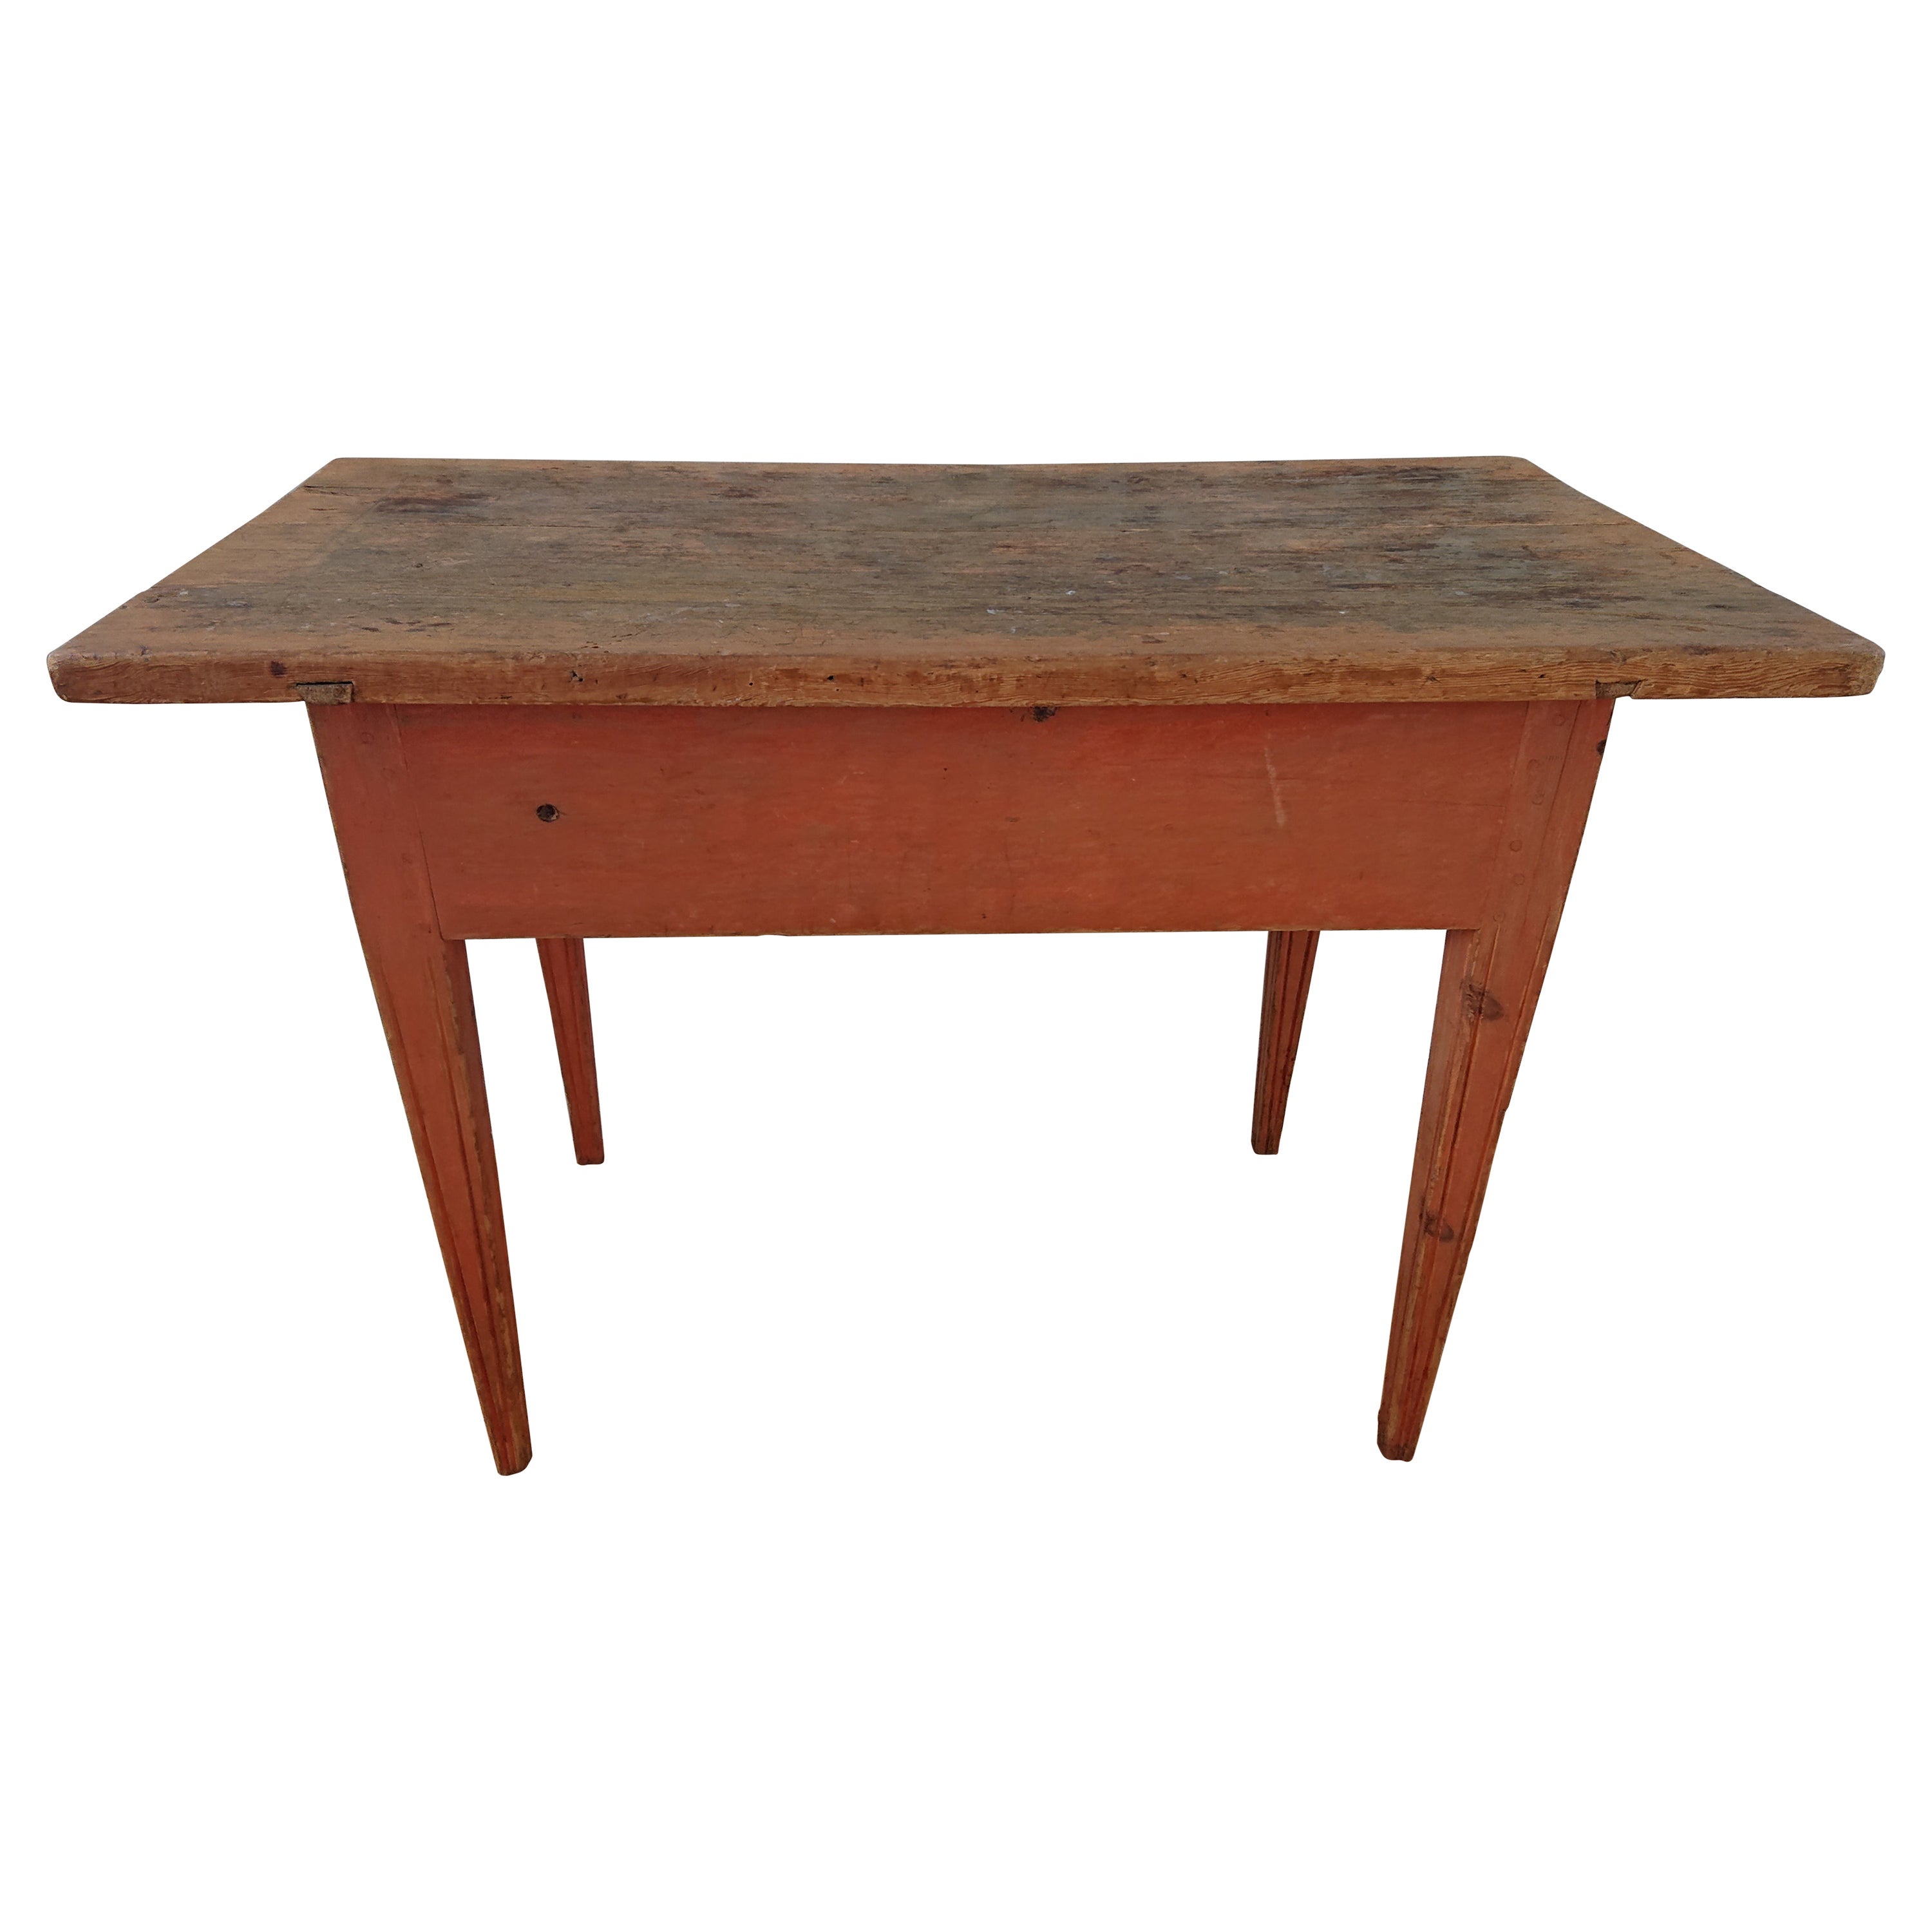 Early 19th Century Swedish Antique Rustic Gustavian Table with Original Paint For Sale